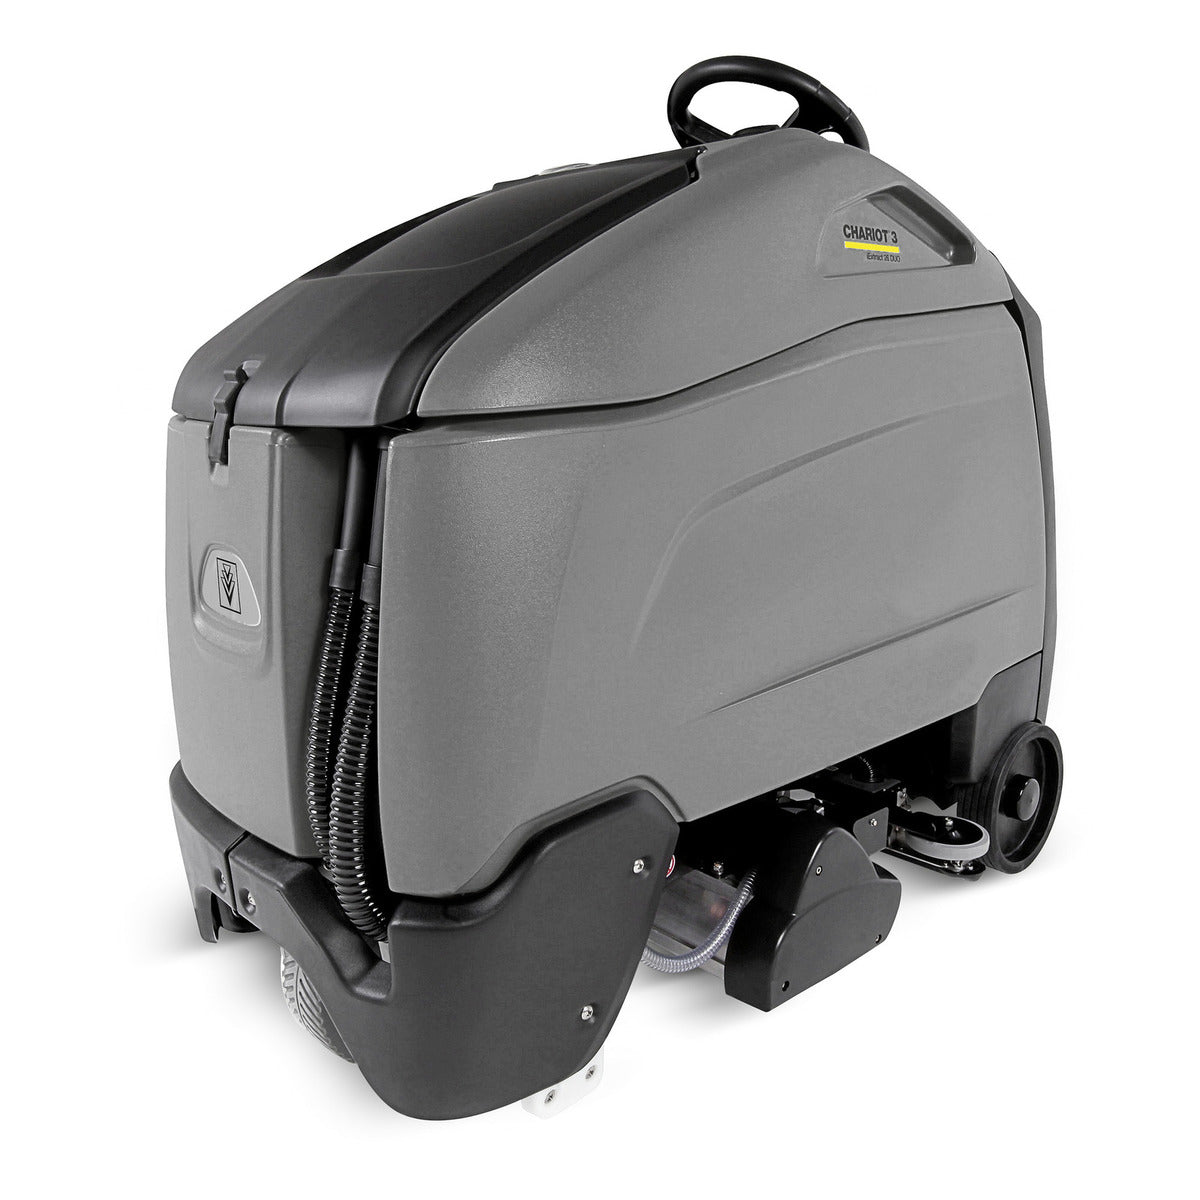 Karcher Chariot 3 iExtract 26 Duo, 25 Gallon, 26", Battery, Ride On, Carpet Extractor